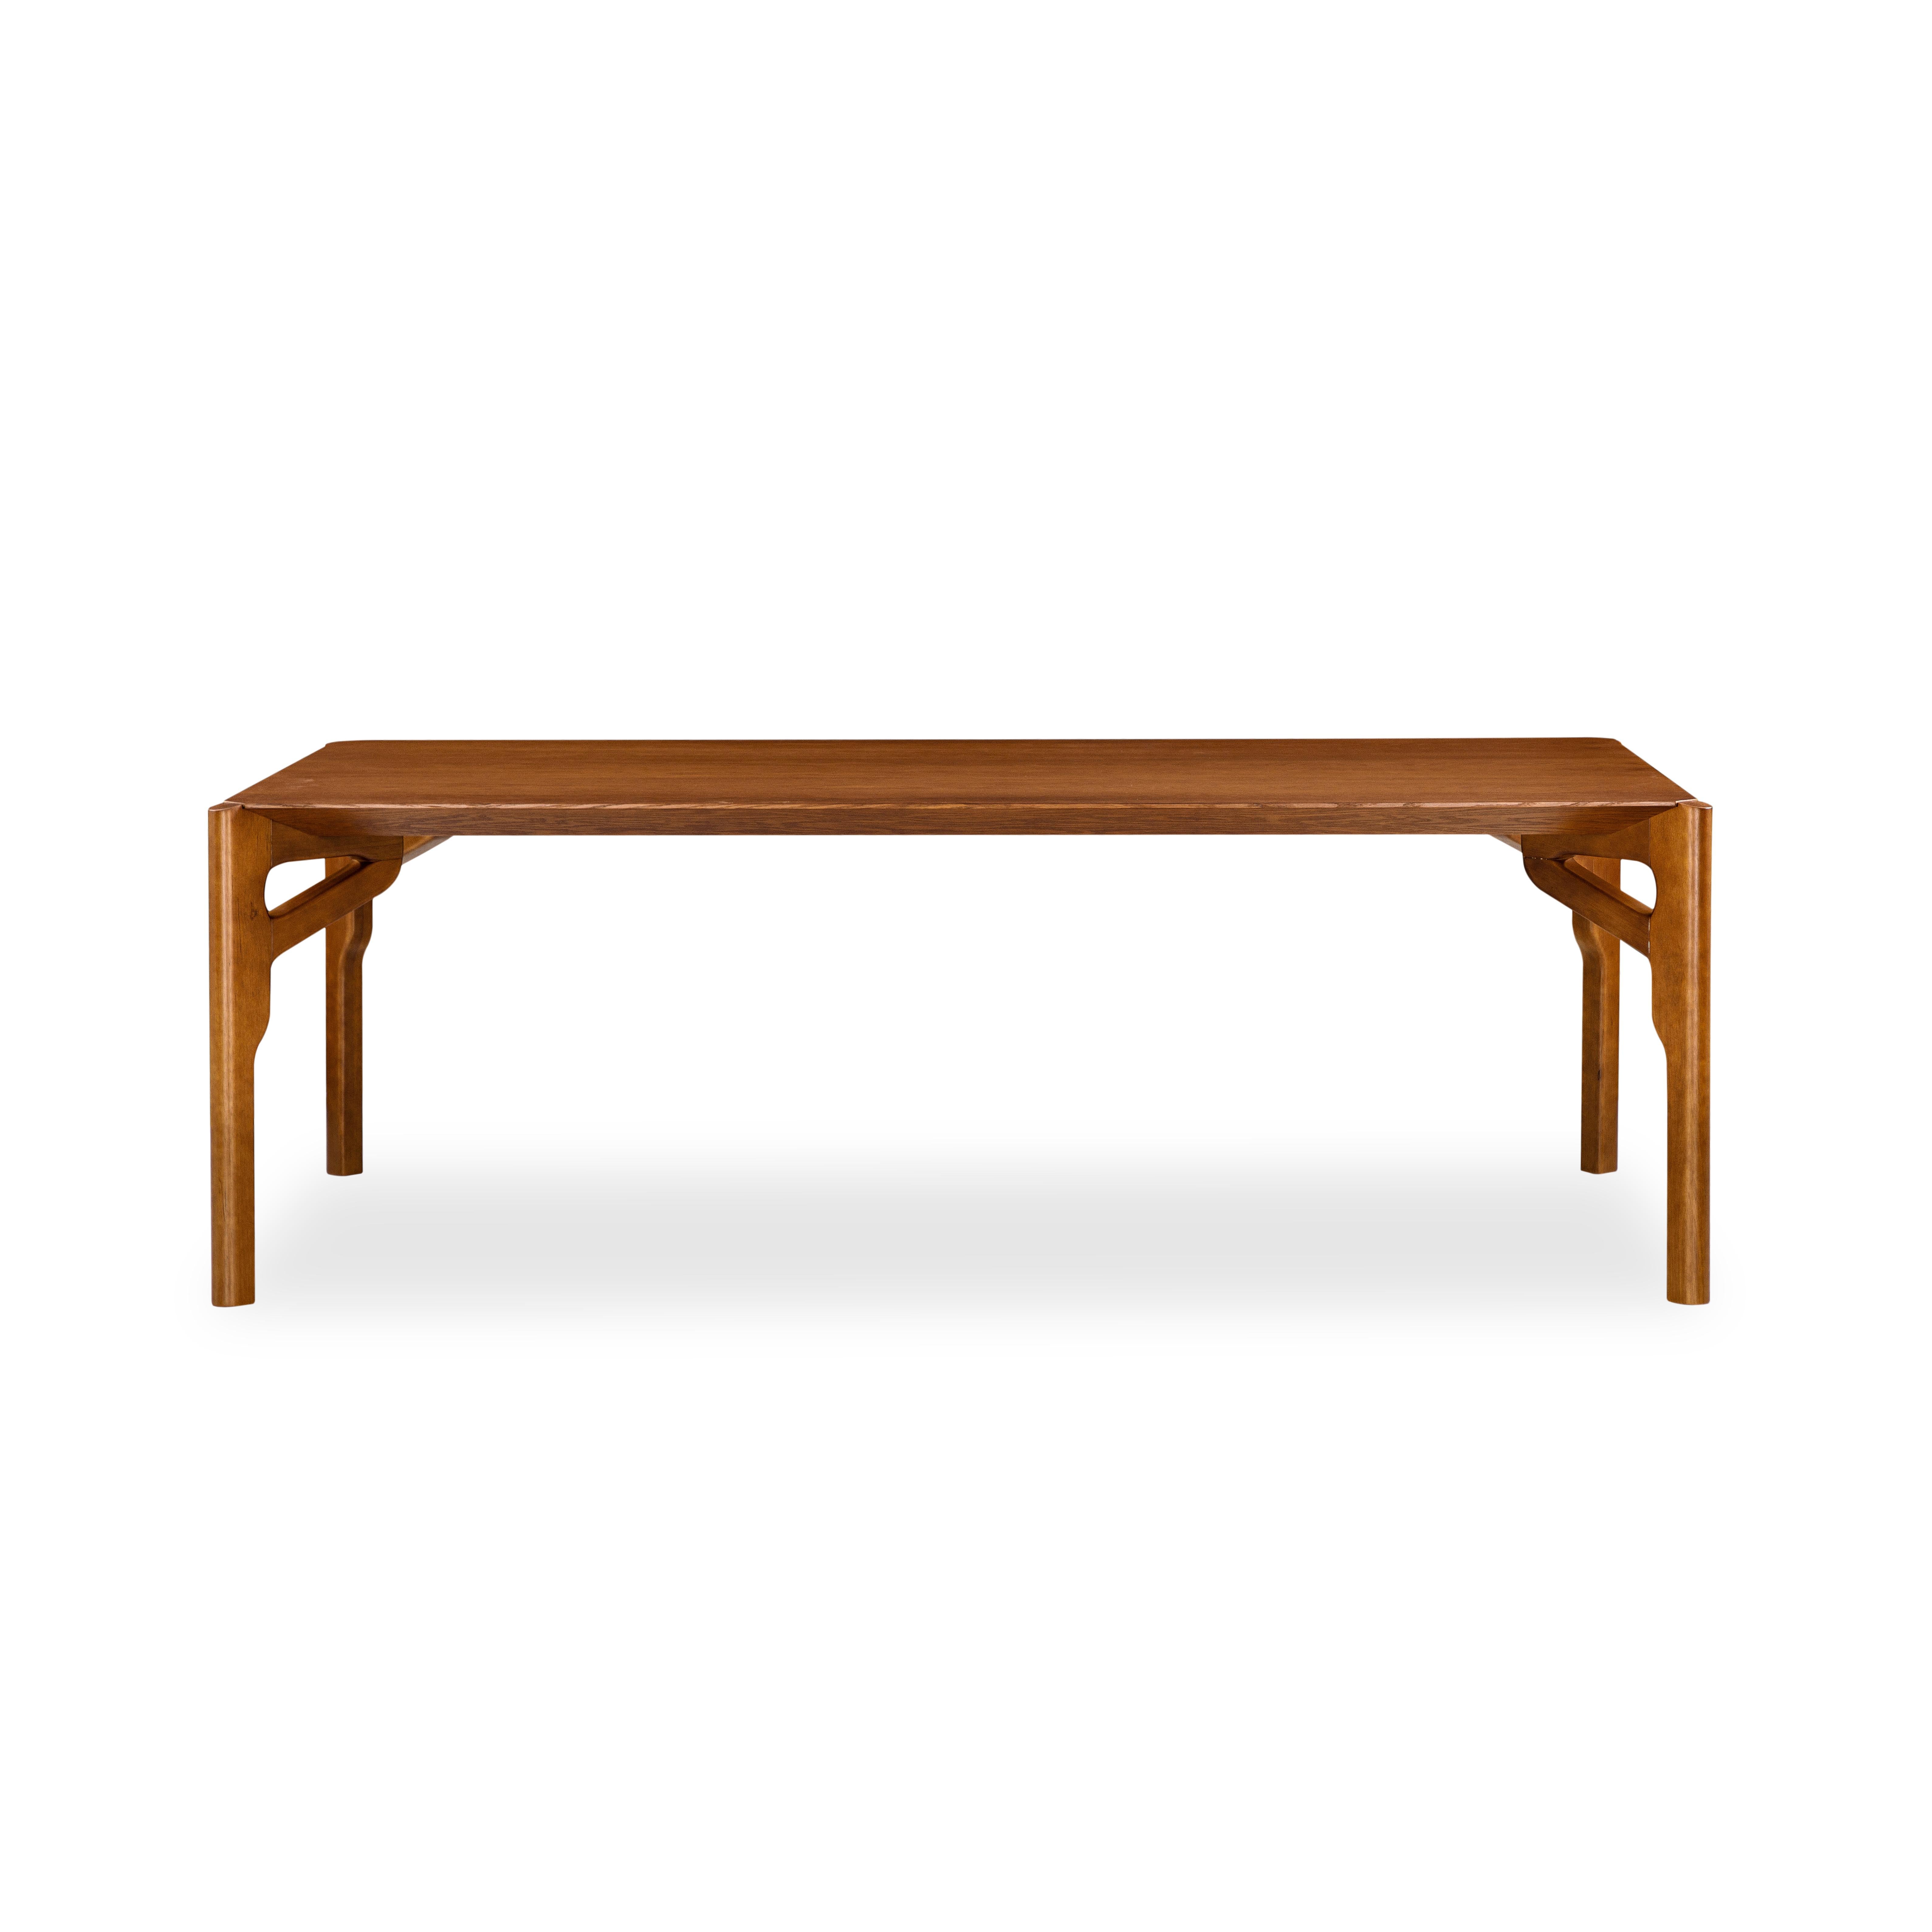 Hardwood Hawk Dining Table with an Almond Oak Wood Veneered Table Top 86'' For Sale